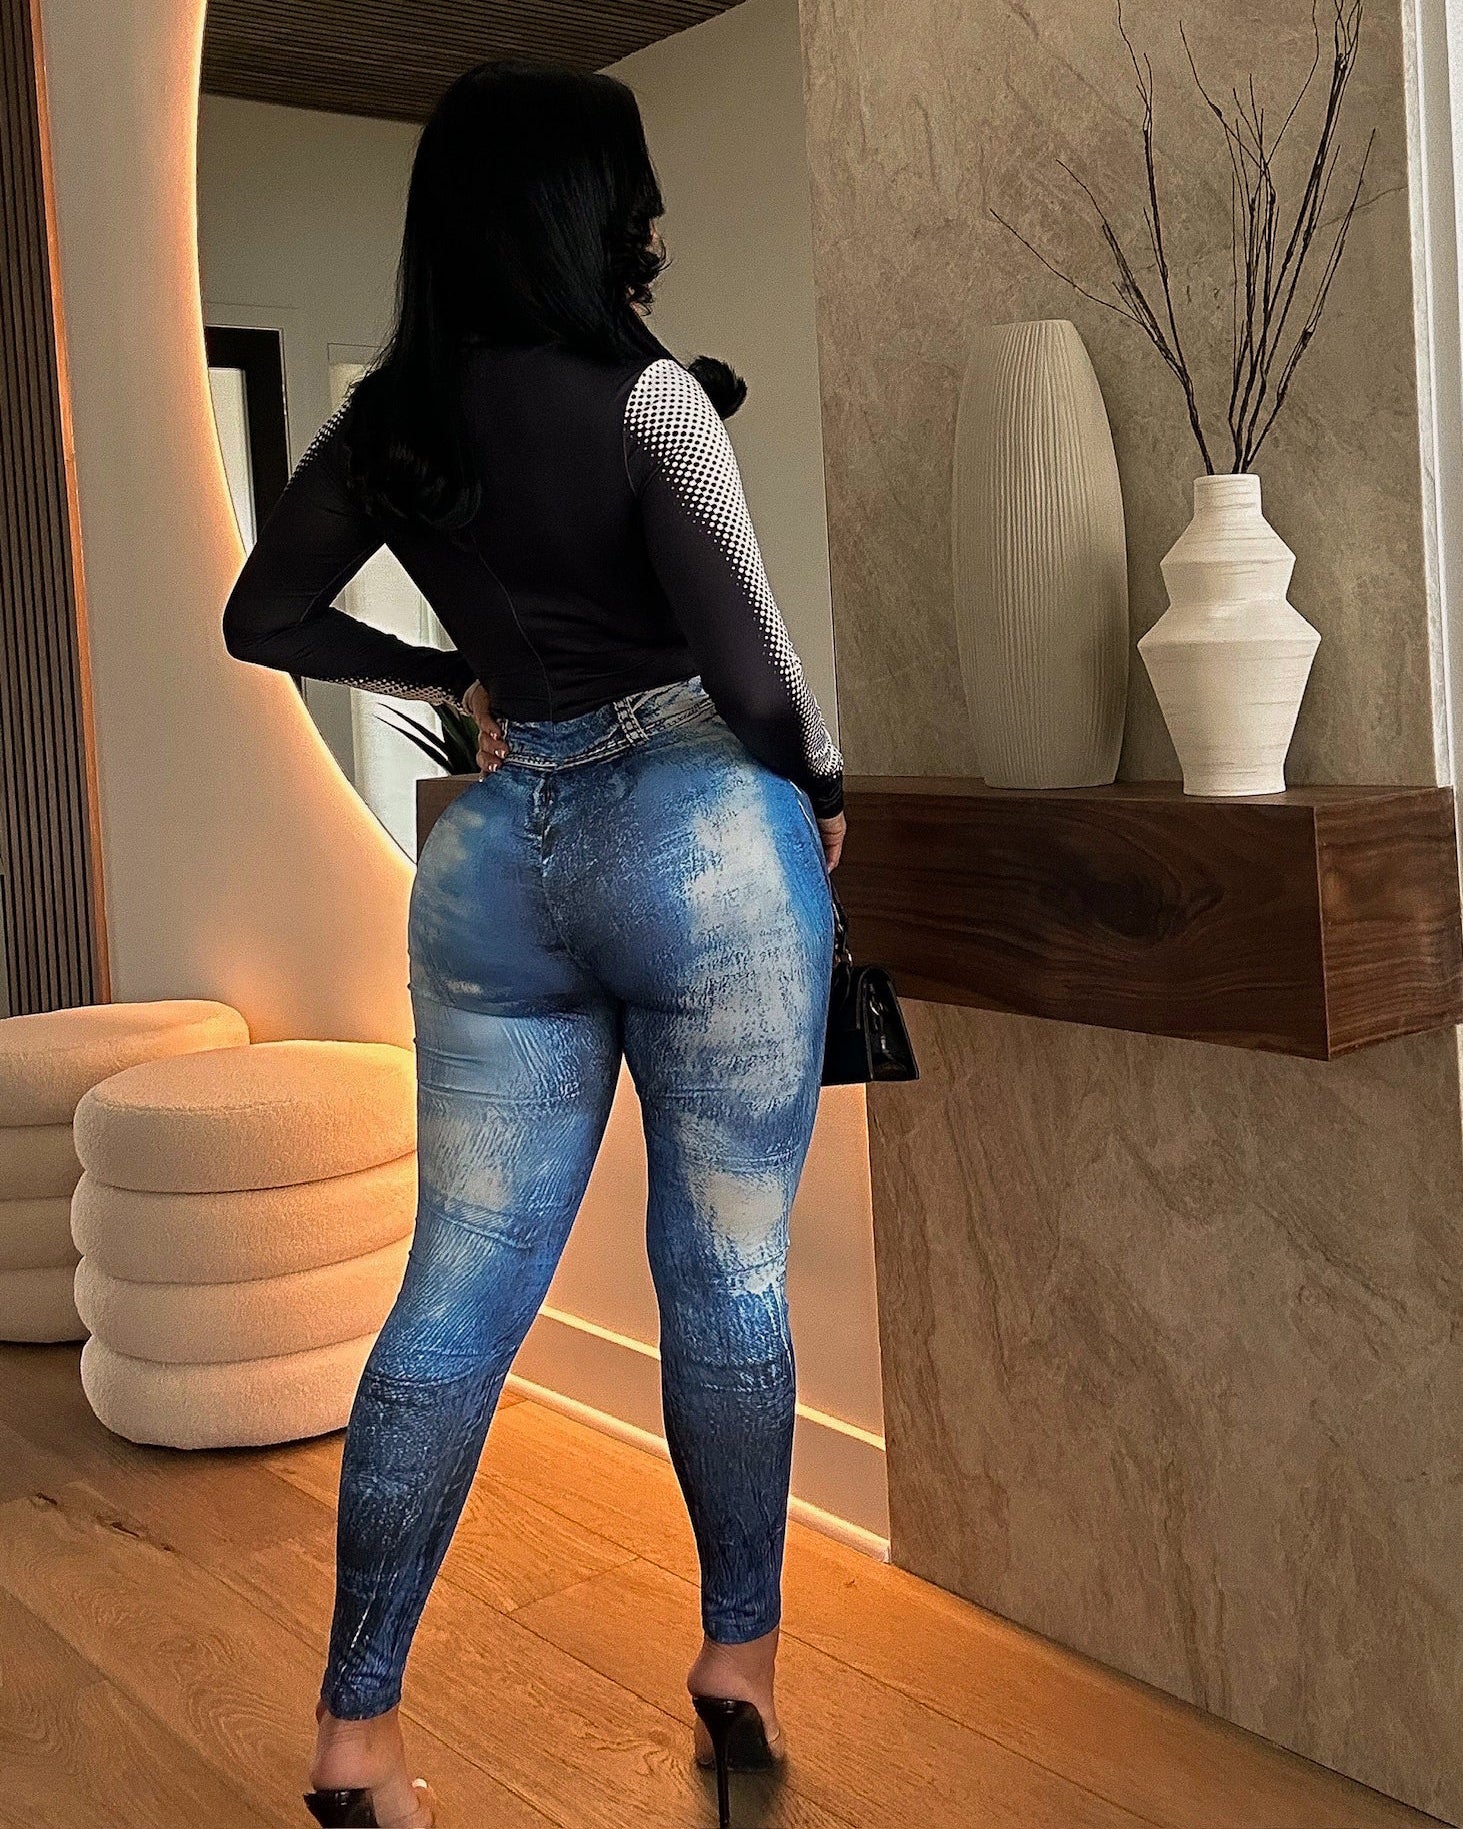 SEXY Body Map Heat Body Morph Print Denim Effect Jumpsuit Outfit